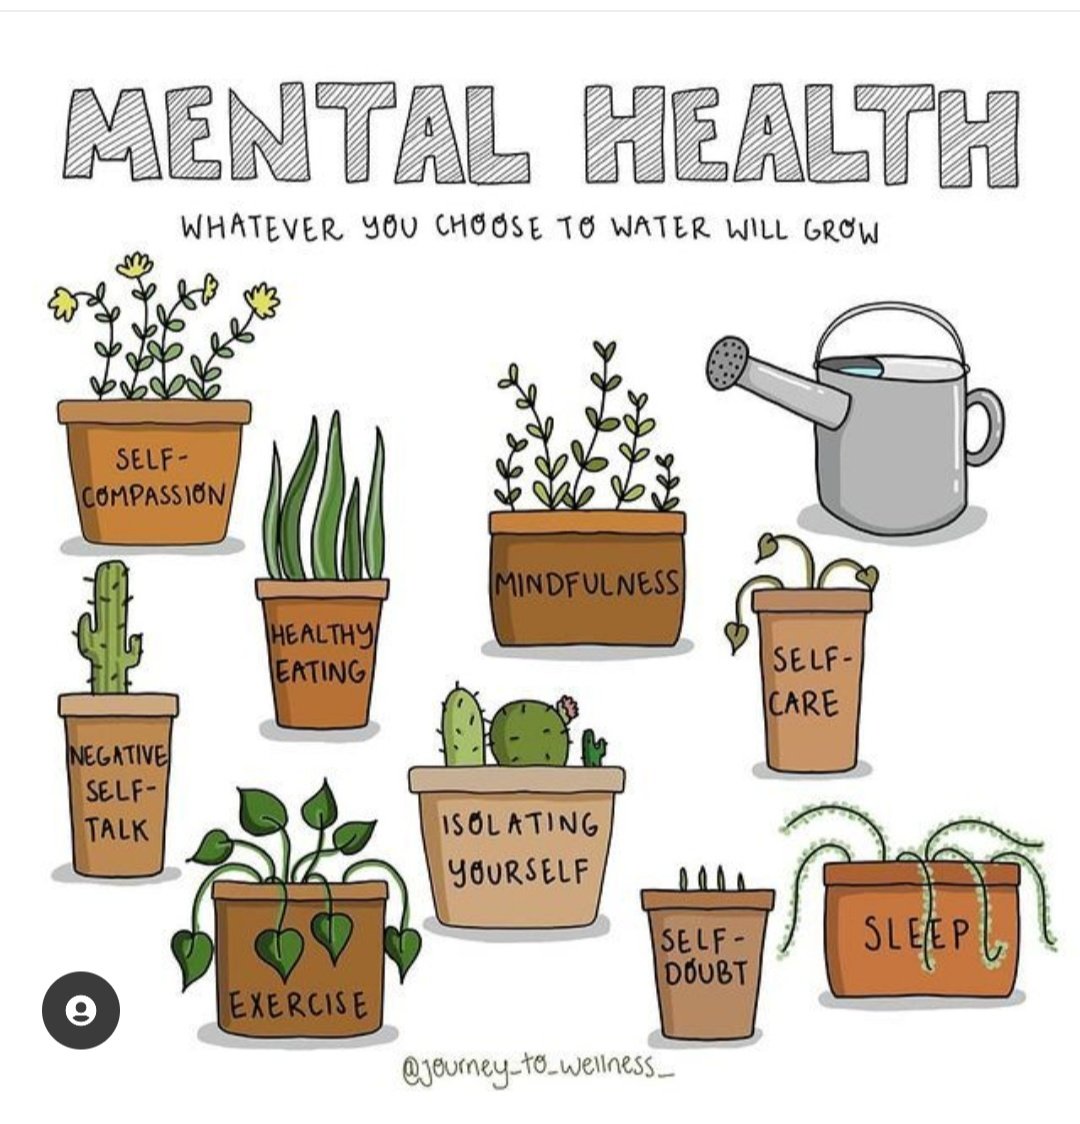 Which one can you choose to focus on today? ☺️

📸 IG: journey_to_wellness

#morningthoughts #wellbeing #mentalhealthawareness